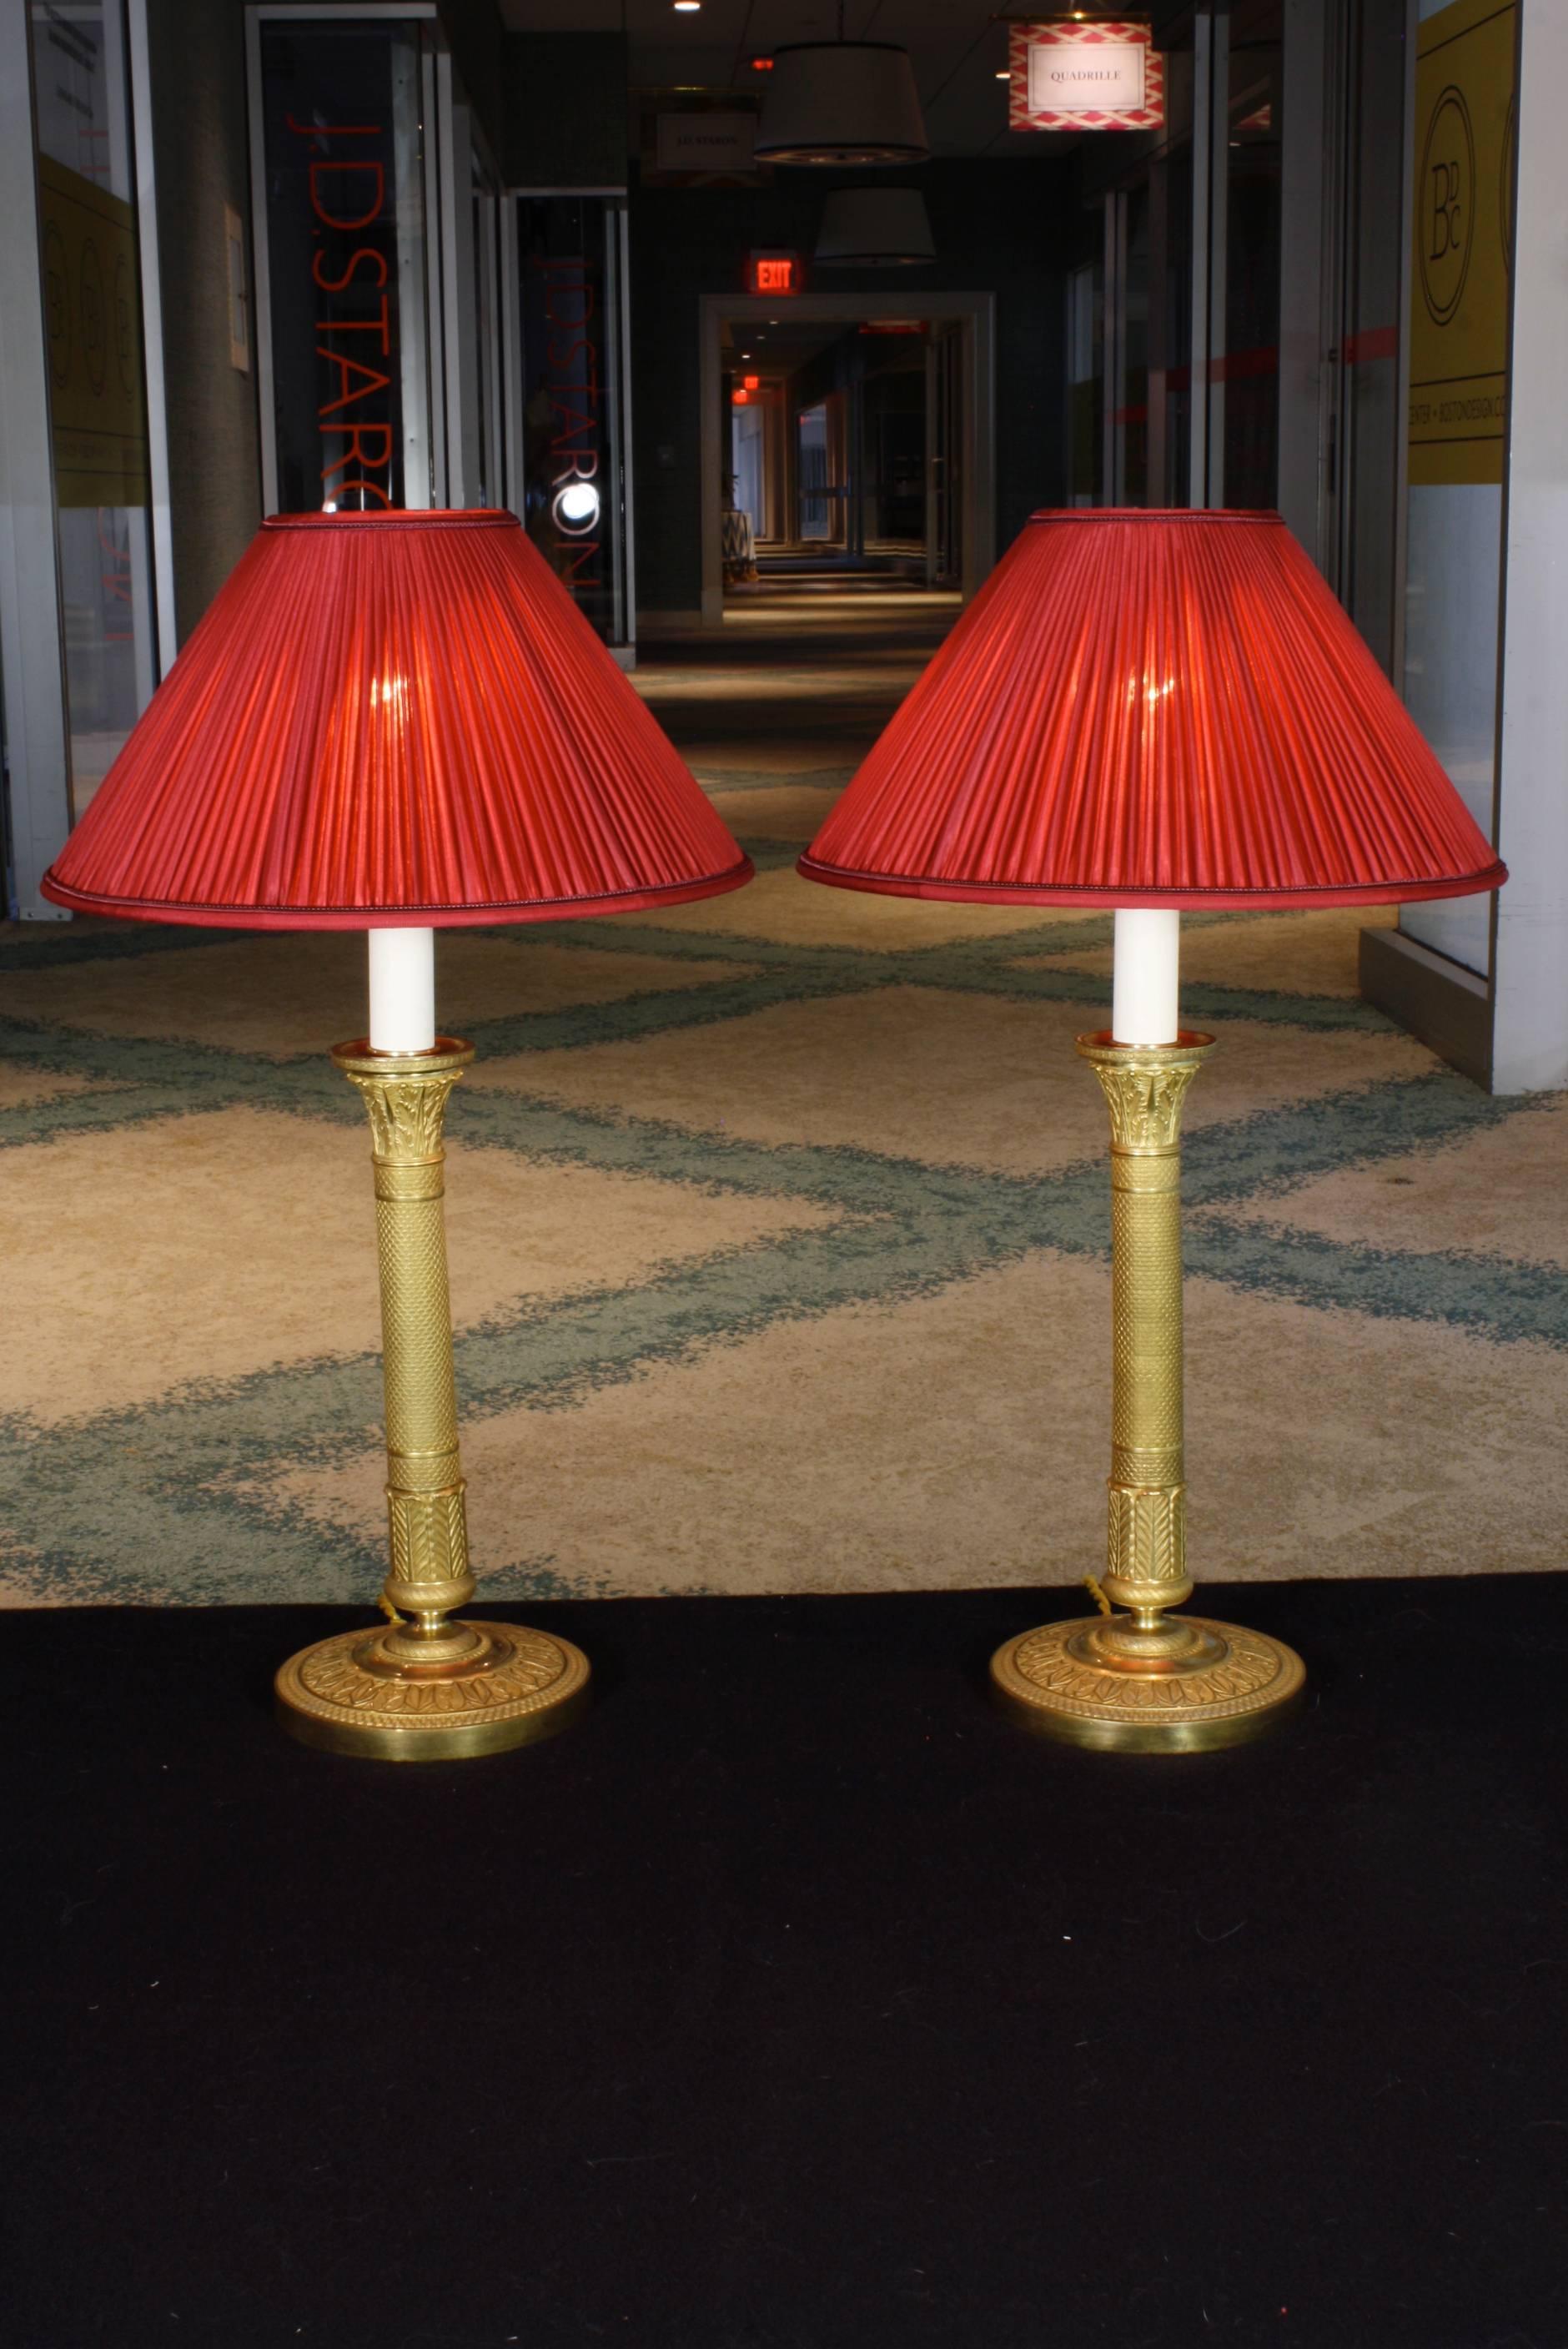 Pair of gilt bronze French Empire style candlesticks that have been retrofitted as lamps with pleated silk shades (late 19th century). The candlesticks are high-quality, finely-chased. Wired for the US, with the wires running through the candlestick